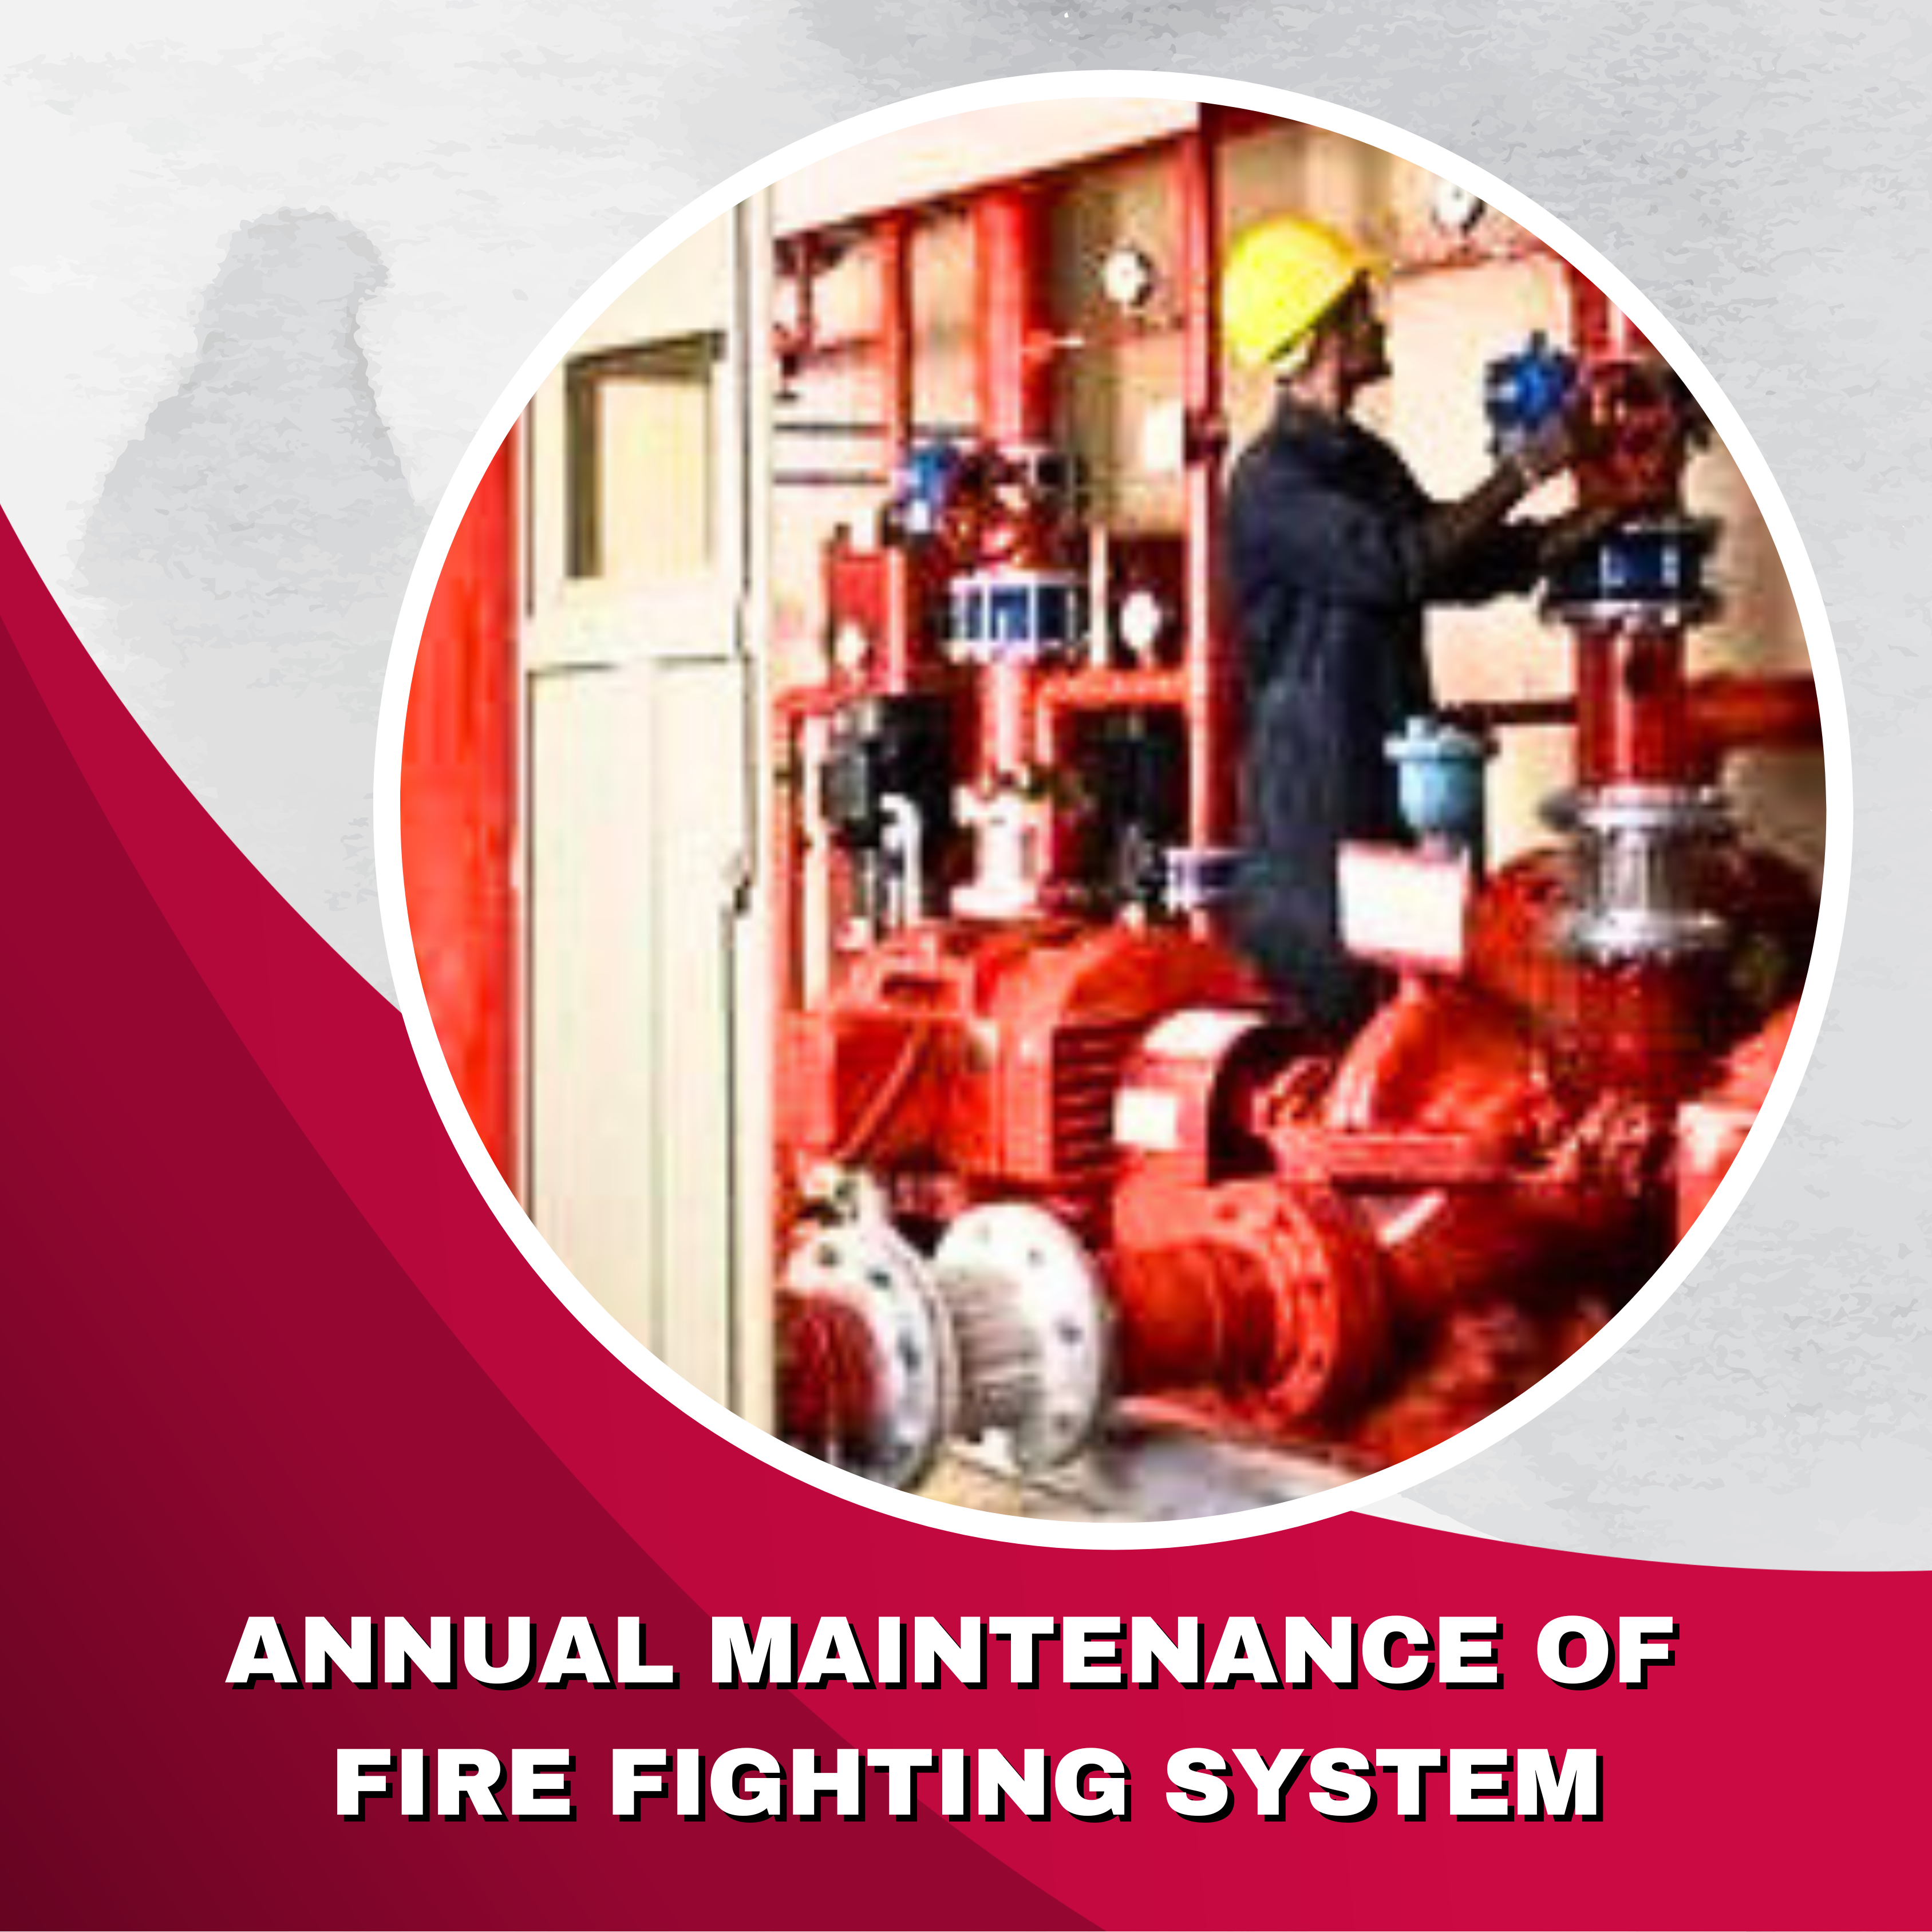 FIRE FIGHTING SYSTEM ANNUAL MAINTENANCE - FIRE CHAMPS